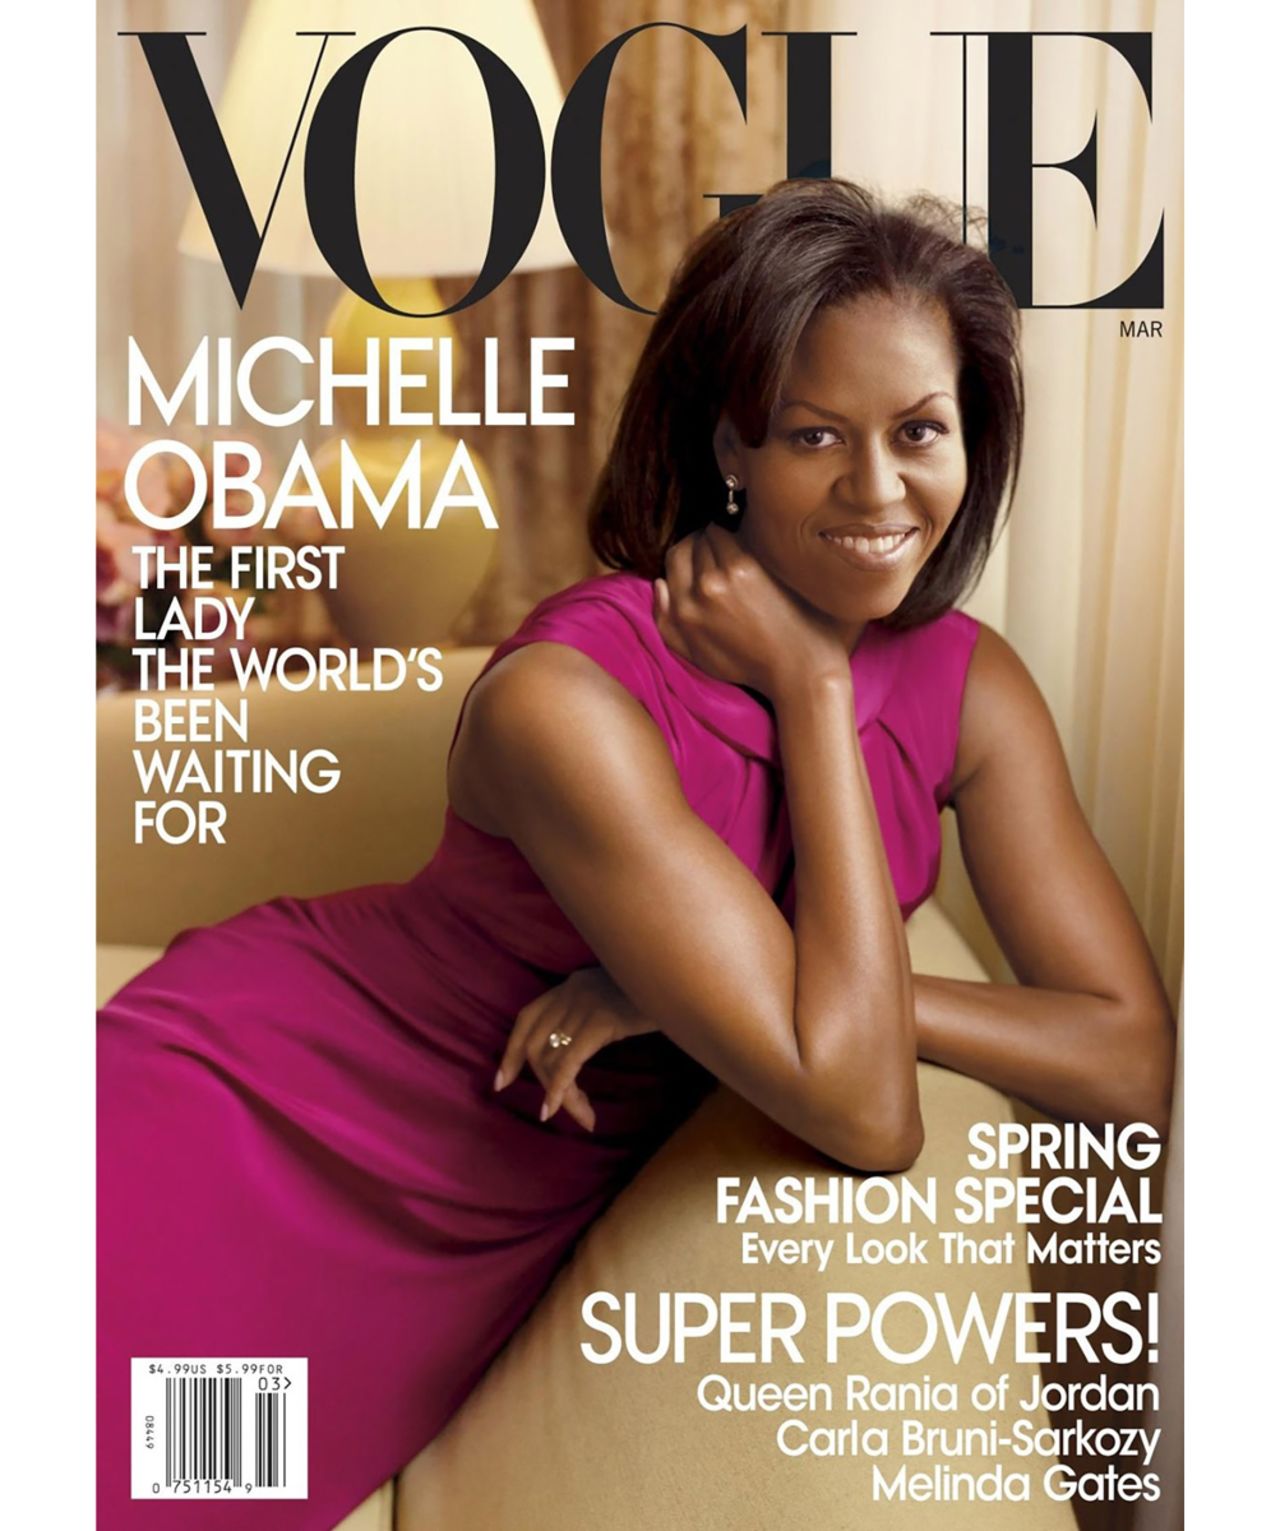 Michelle Obama photographed by Annie Leibovitz